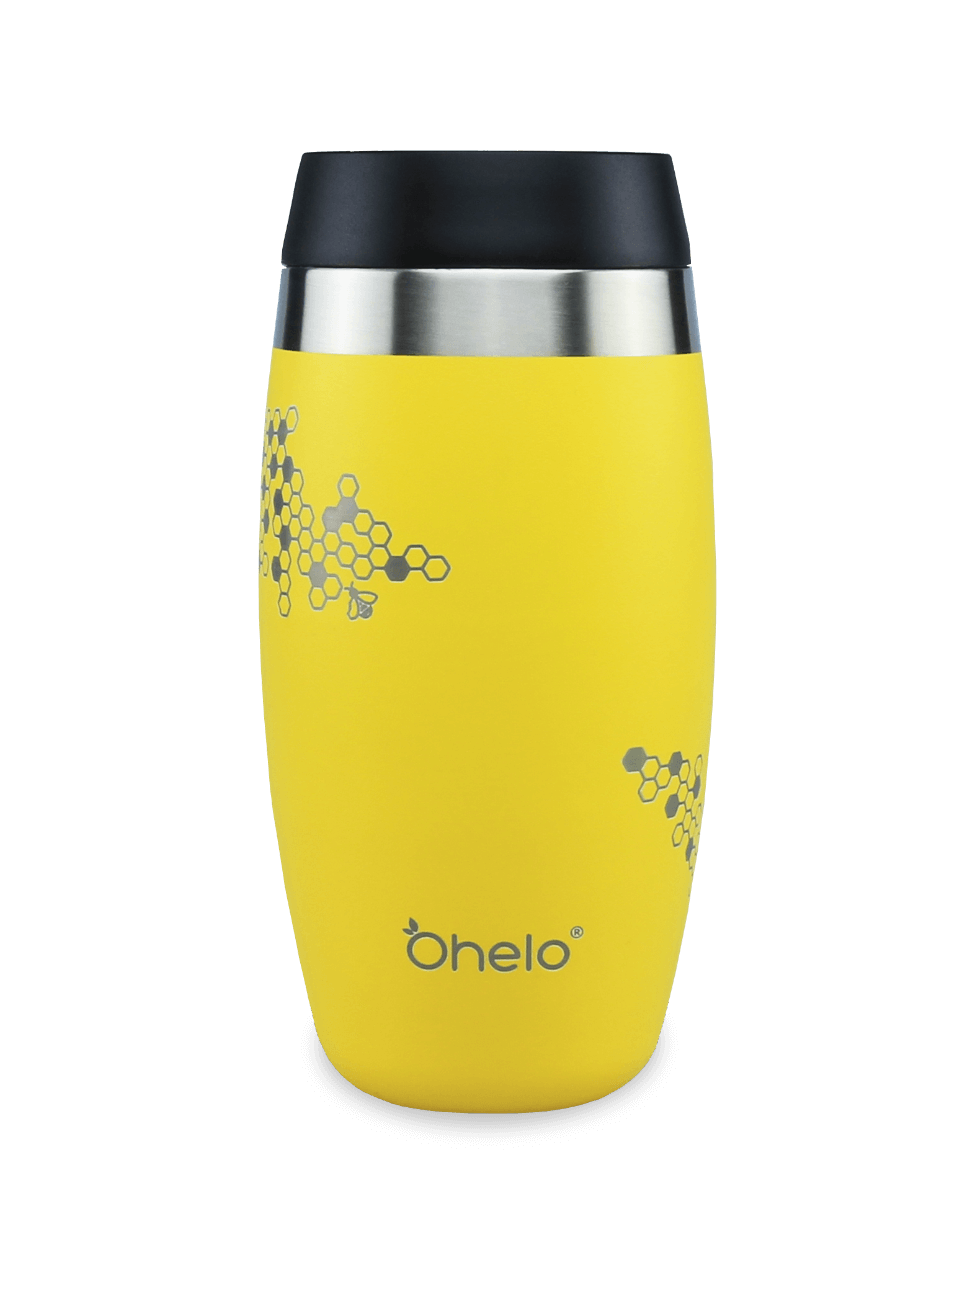 400ml Ohelo insulated tumbler in yellow with laser etched honeycomb and bee design